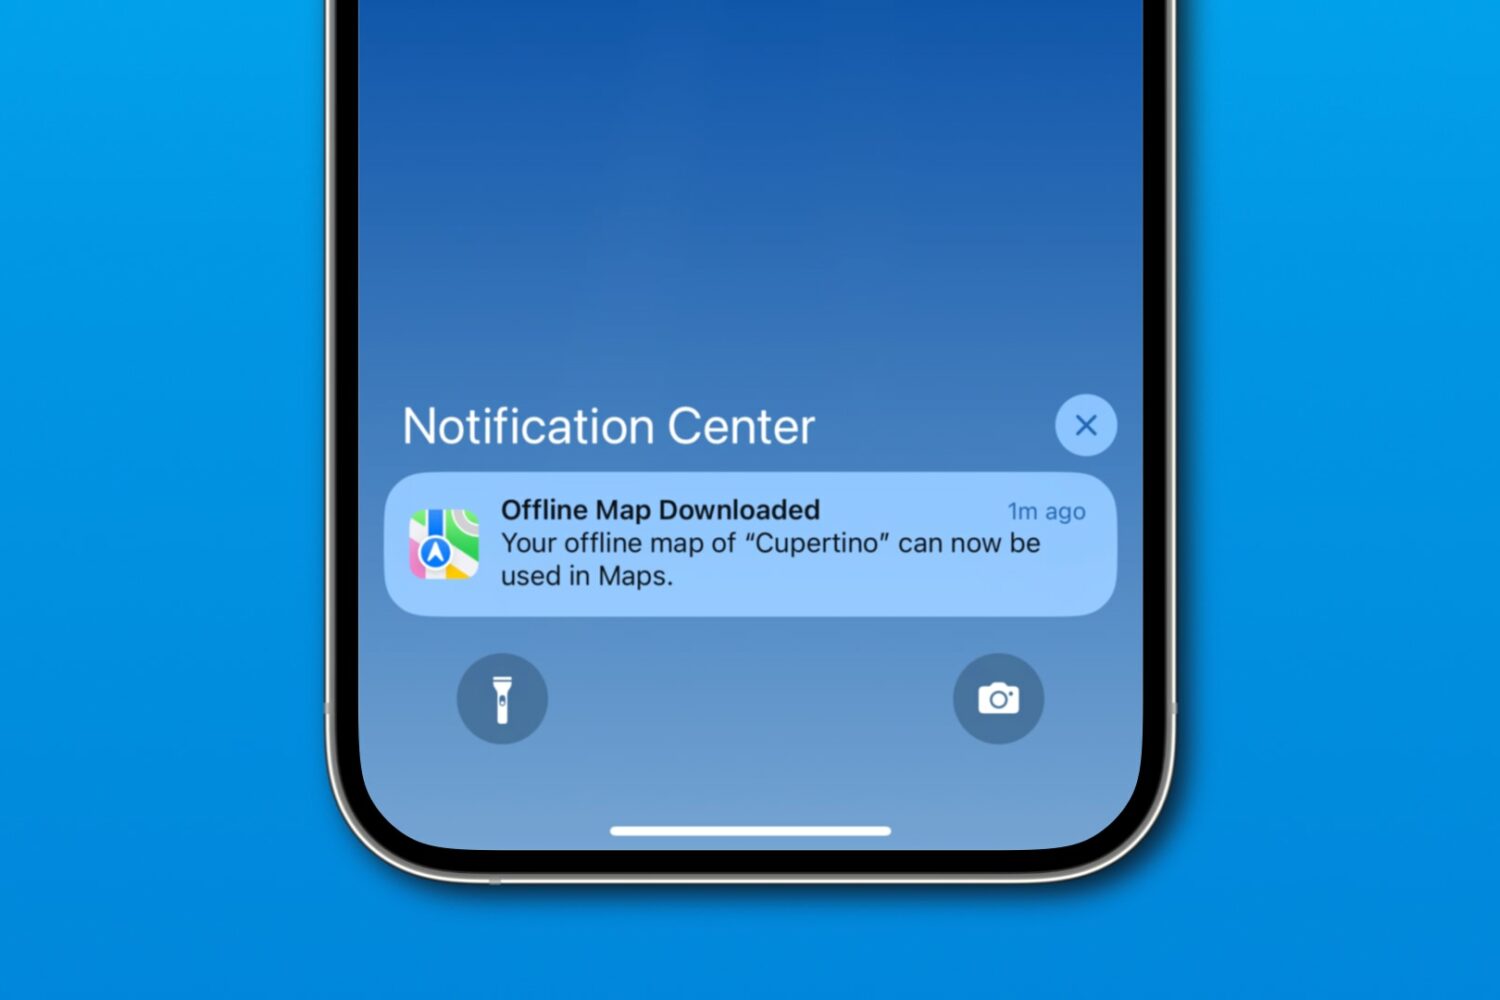 iPhone screenshot showing the notification when a downloaded map is ready for offline use